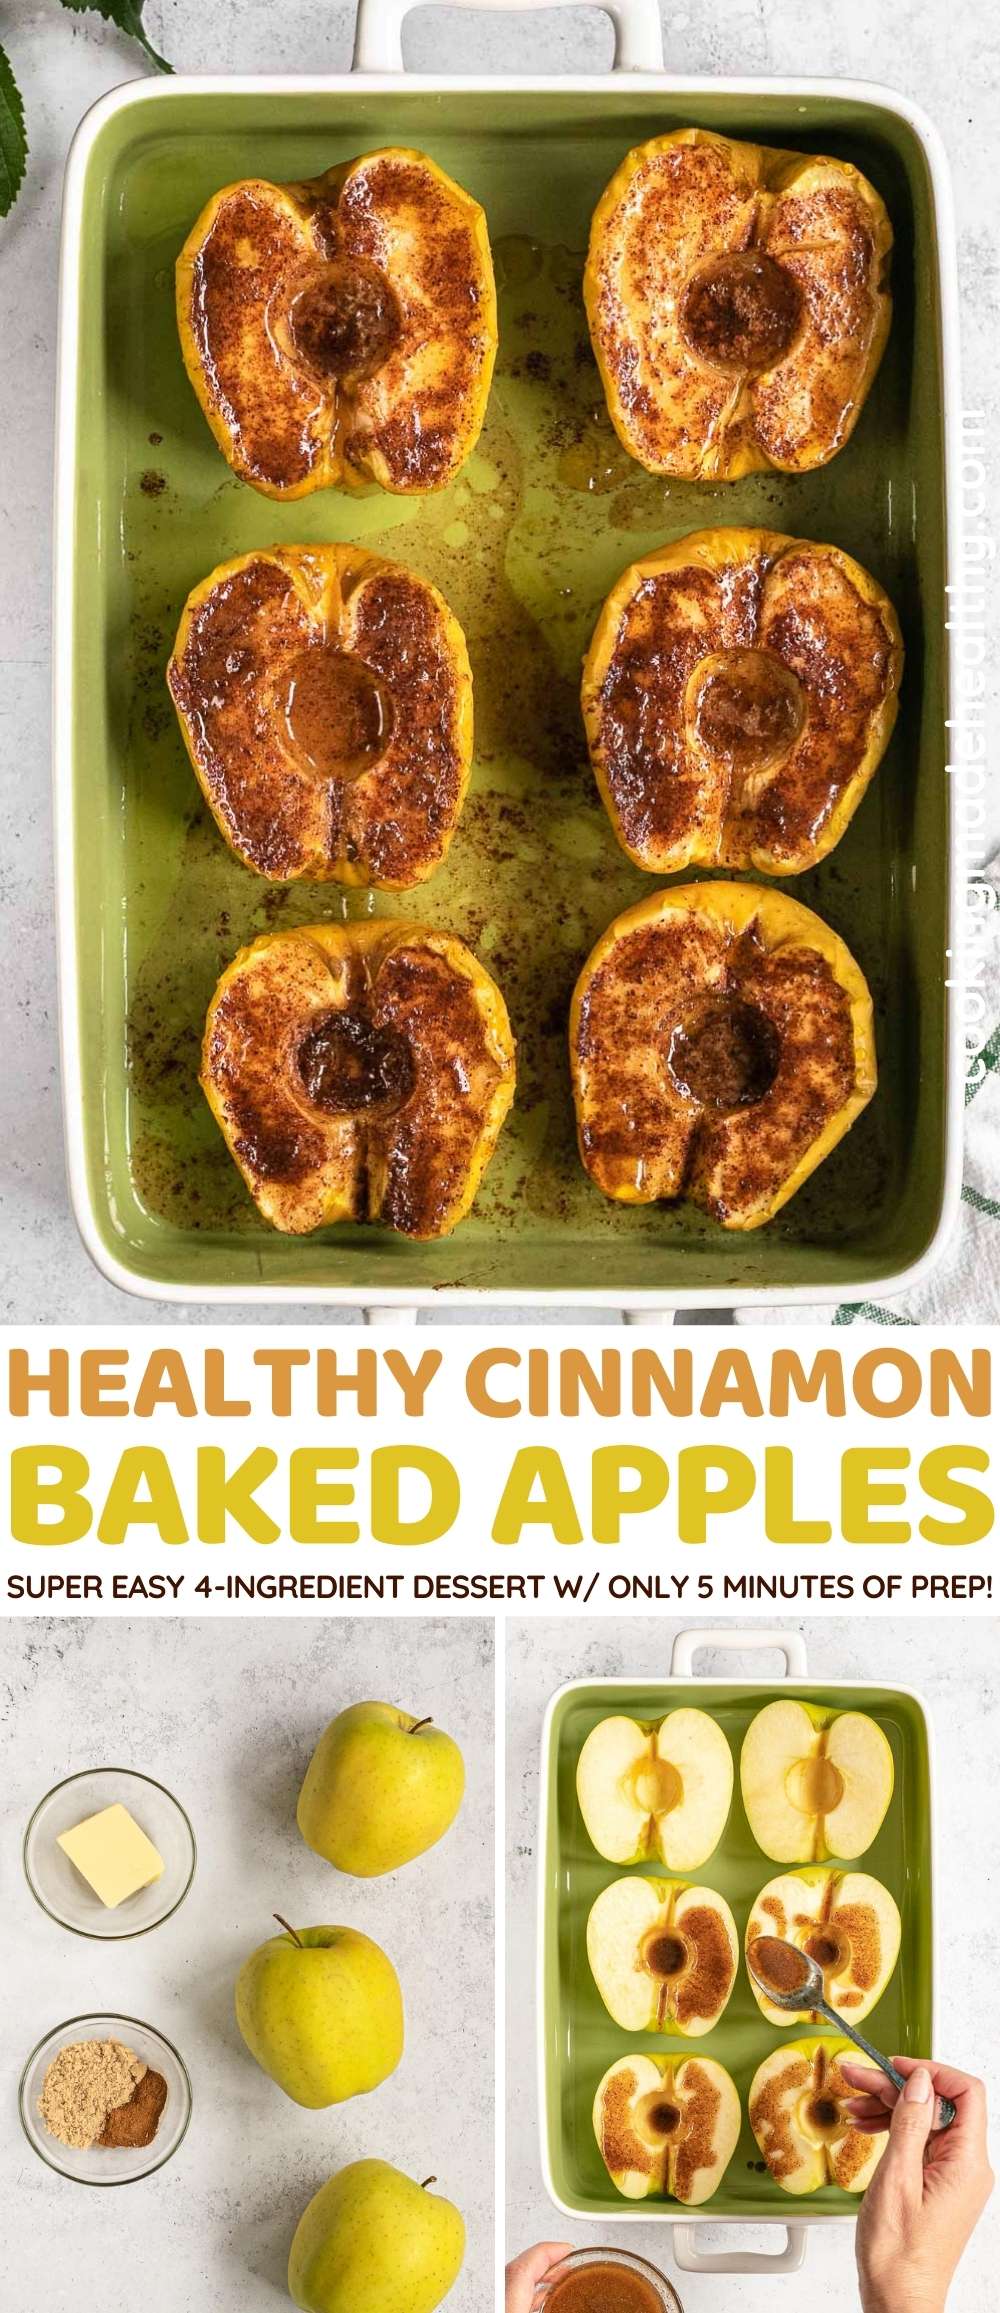 Healthy Cinnamon Baked Apples collage